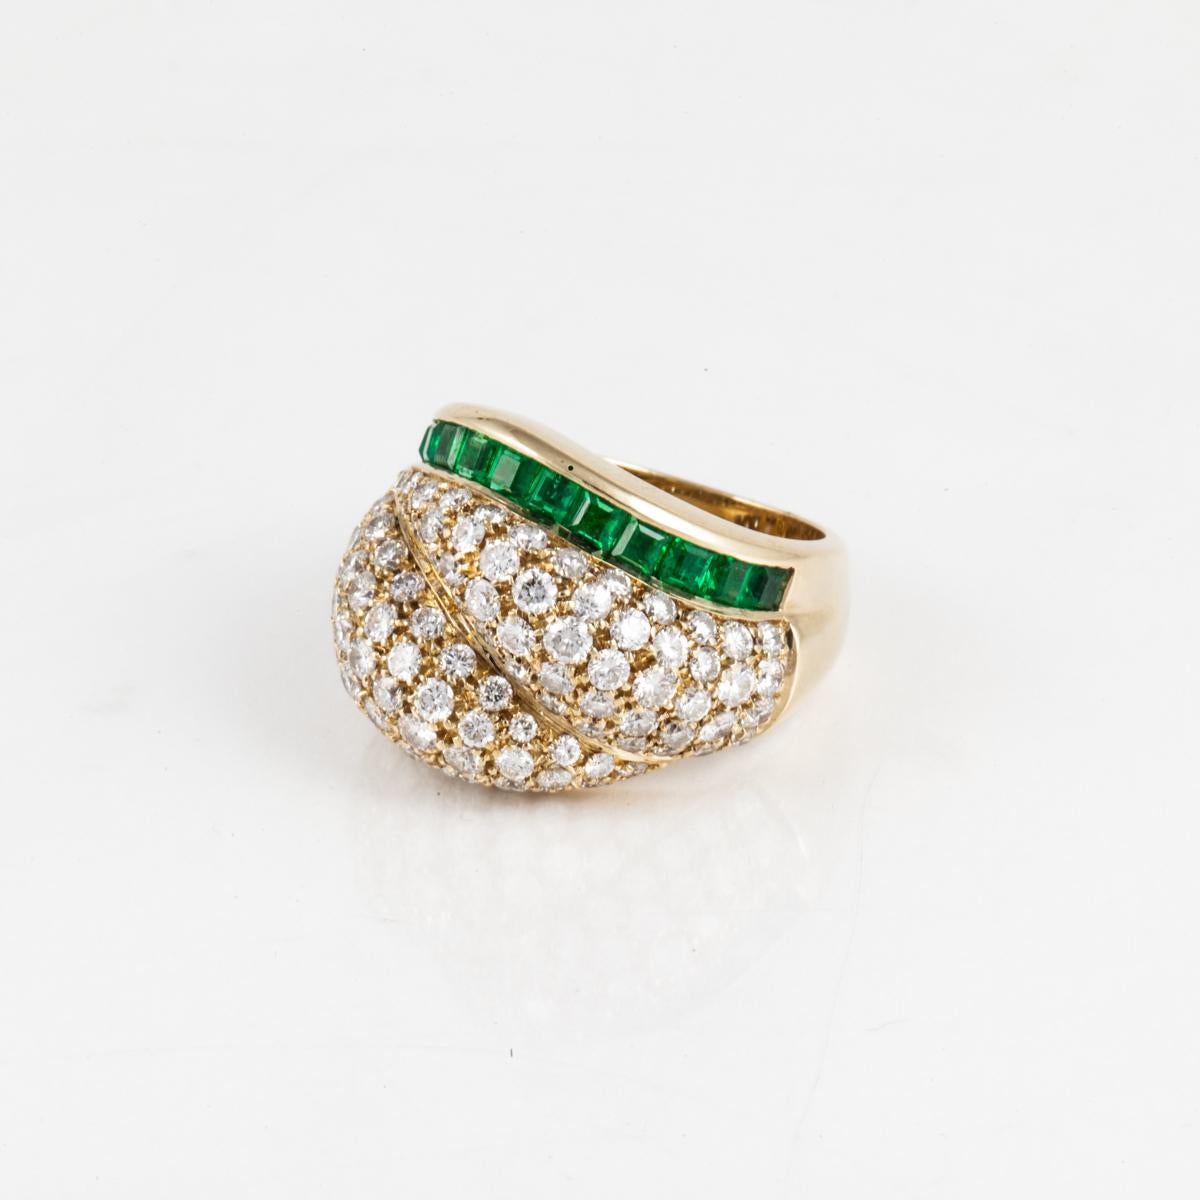 An estate Tiffany & Co. pavé diamond dome ring with square-cut emerald accents in 18K yellow gold.  The ring has 113 round diamonds that total 4.50 carats, E-F color and VVS2-VS1 clarity.  The ring is currently a size 6 3/4 and is sizeable.  London,